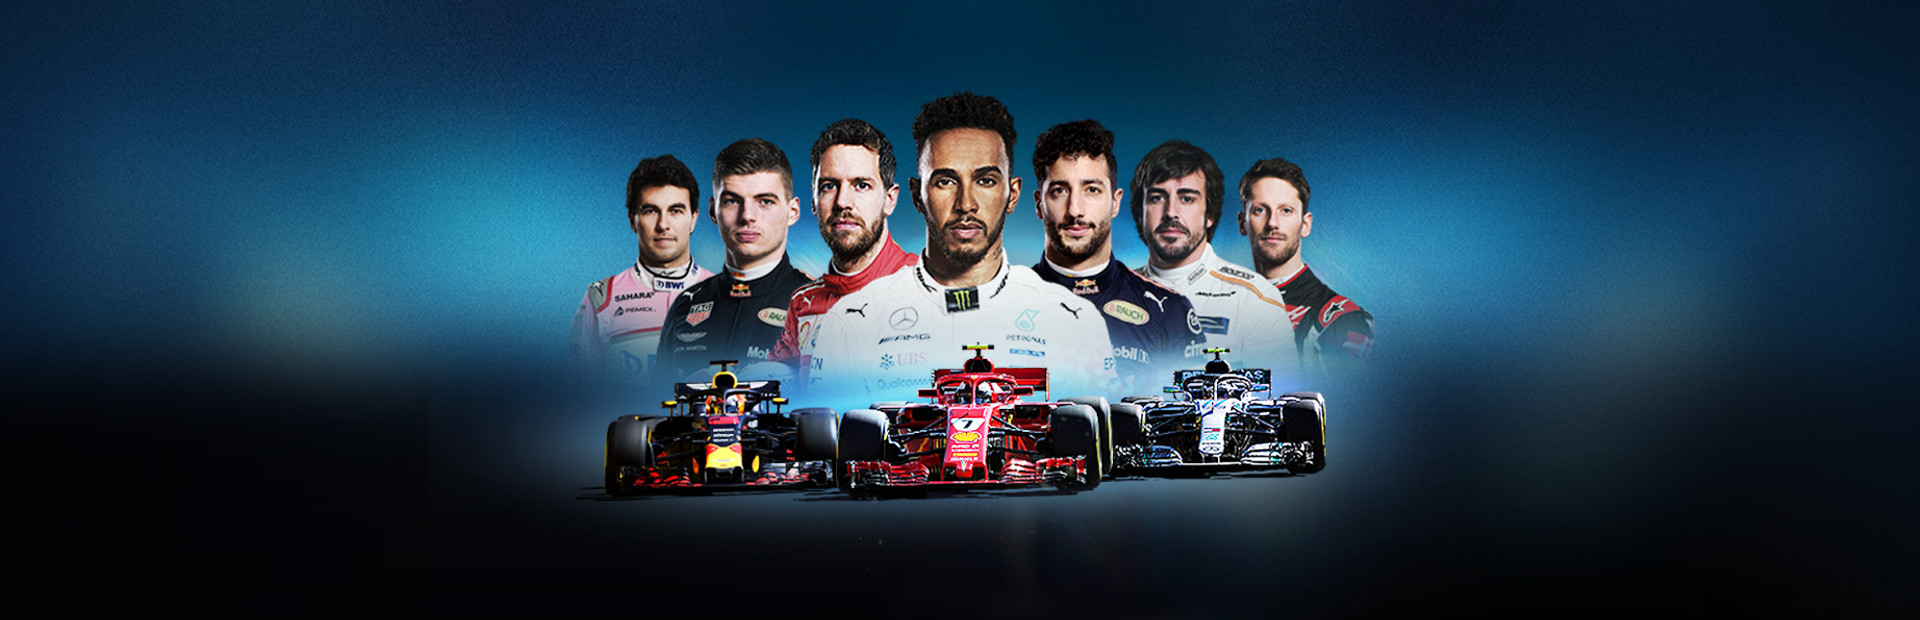 F1 2018 cover image